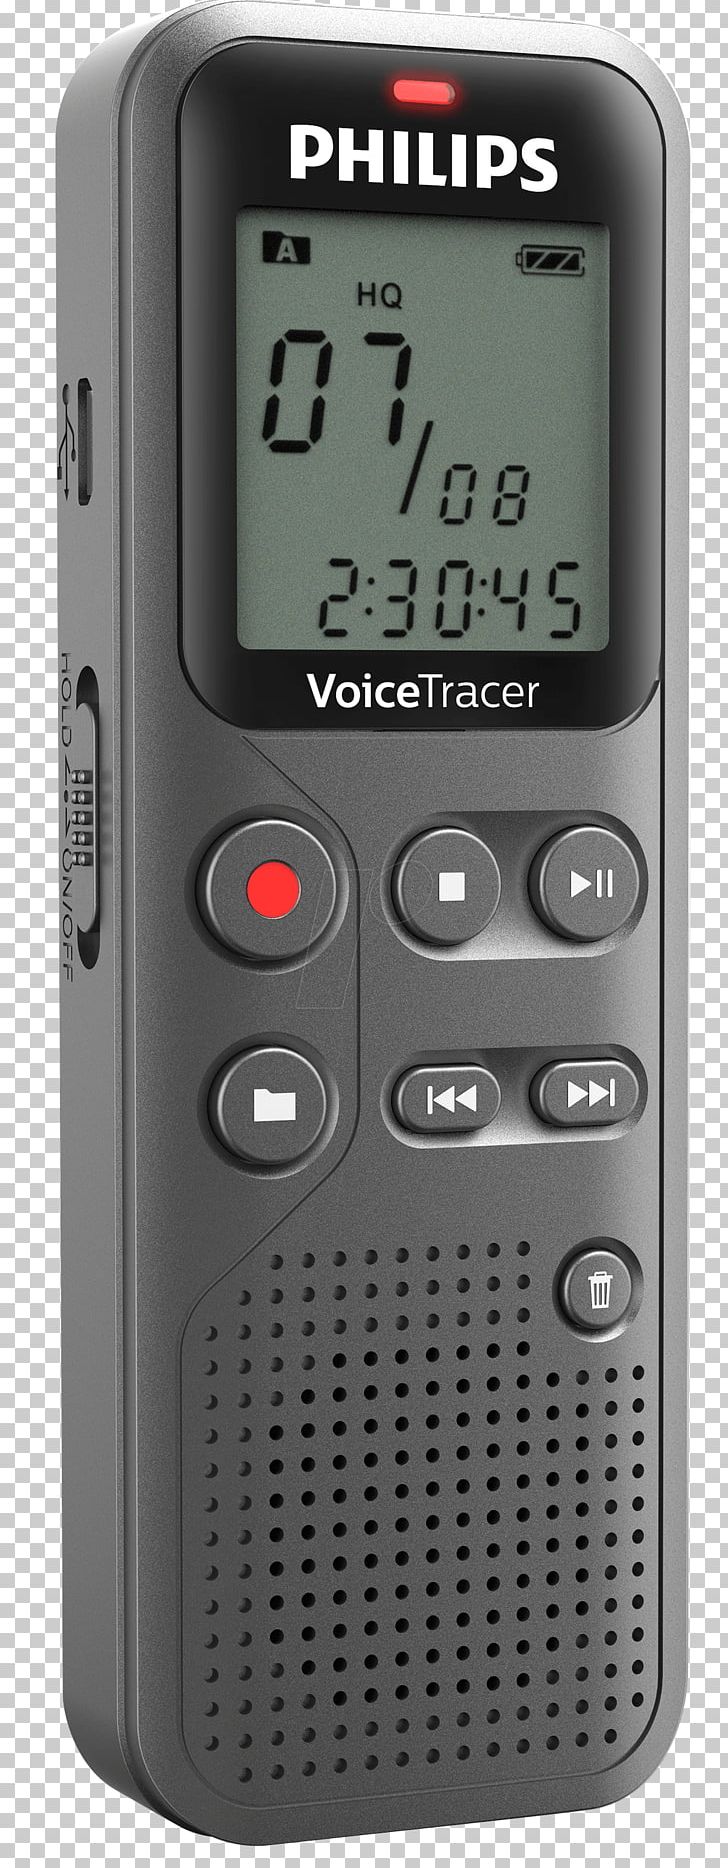 Digital Audio Microphone Dictation Machine Sound Recording And Reproduction PNG, Clipart, Audio, Digital Audio, Digital Dictation, Digital Recording, Electronic Device Free PNG Download